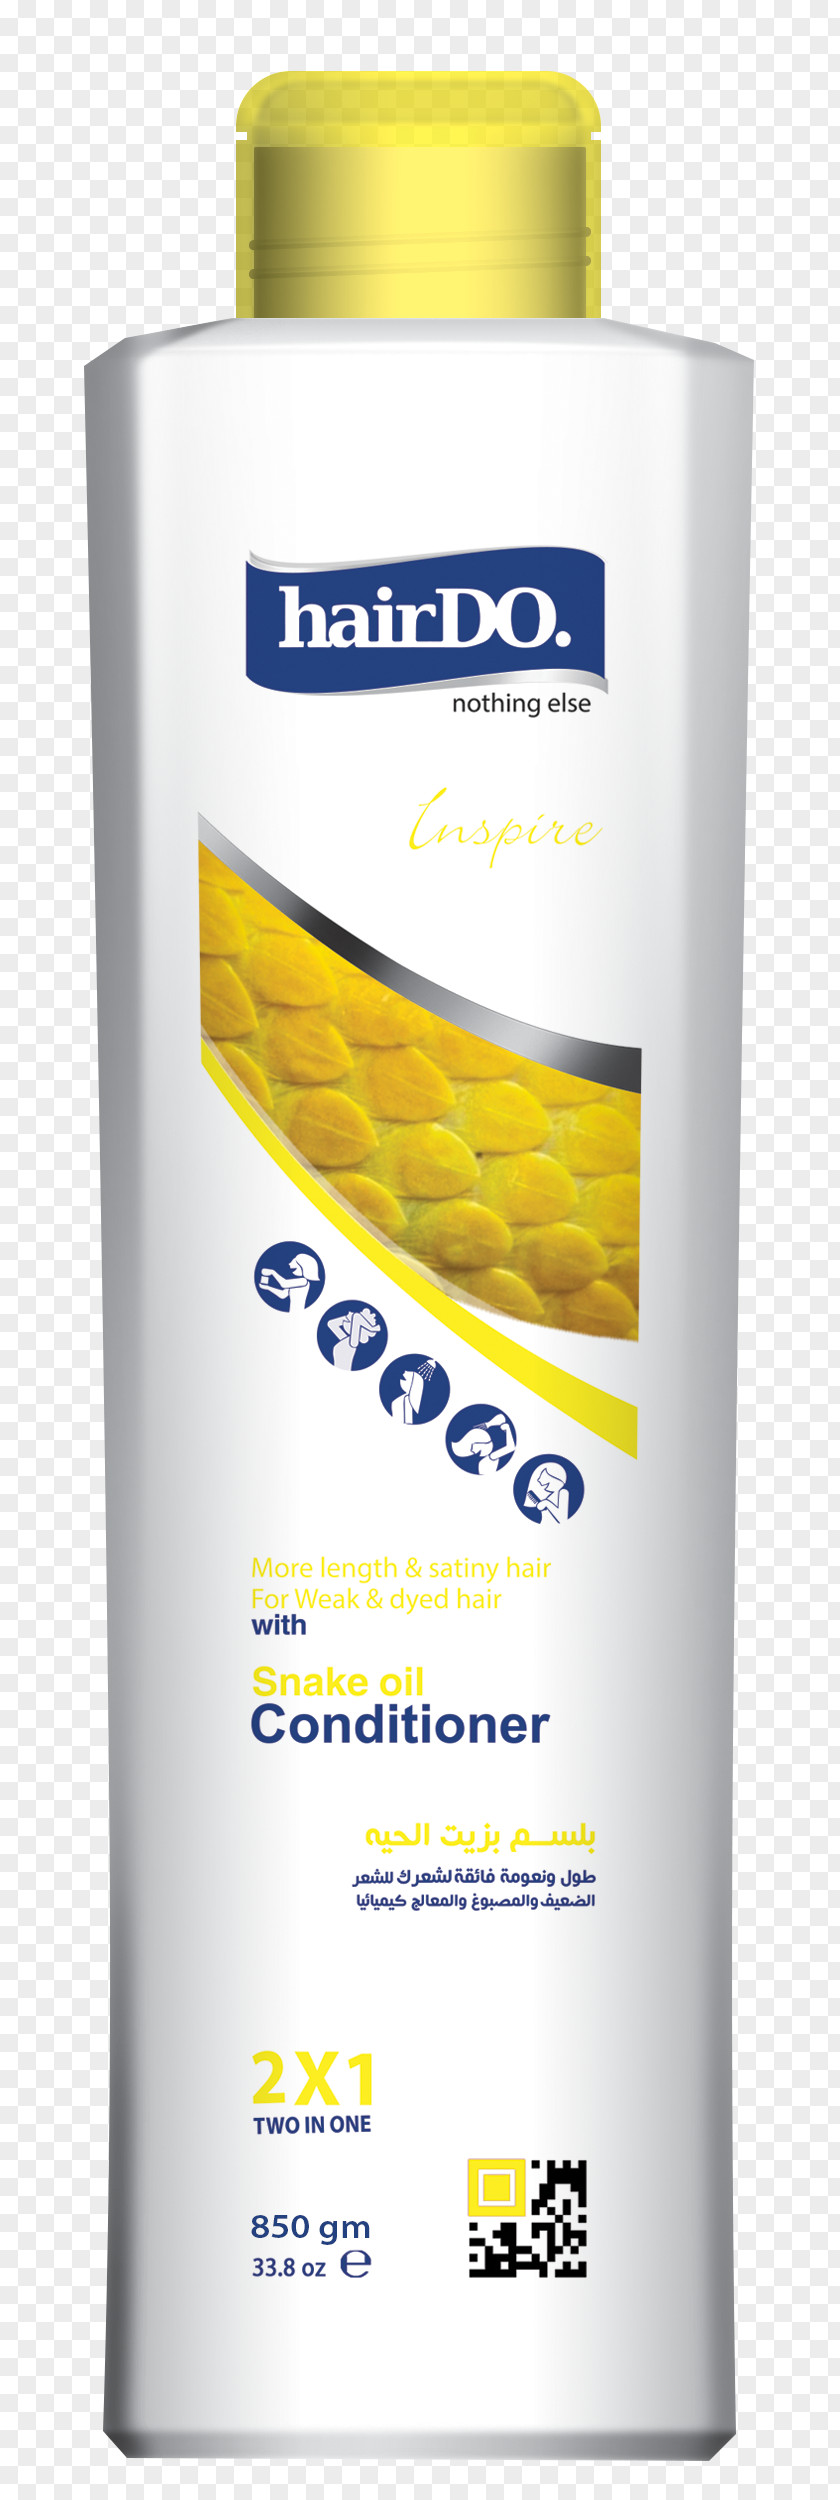 Egypt Lotion Cosmeceutical Cosmetics Skin Care PNG